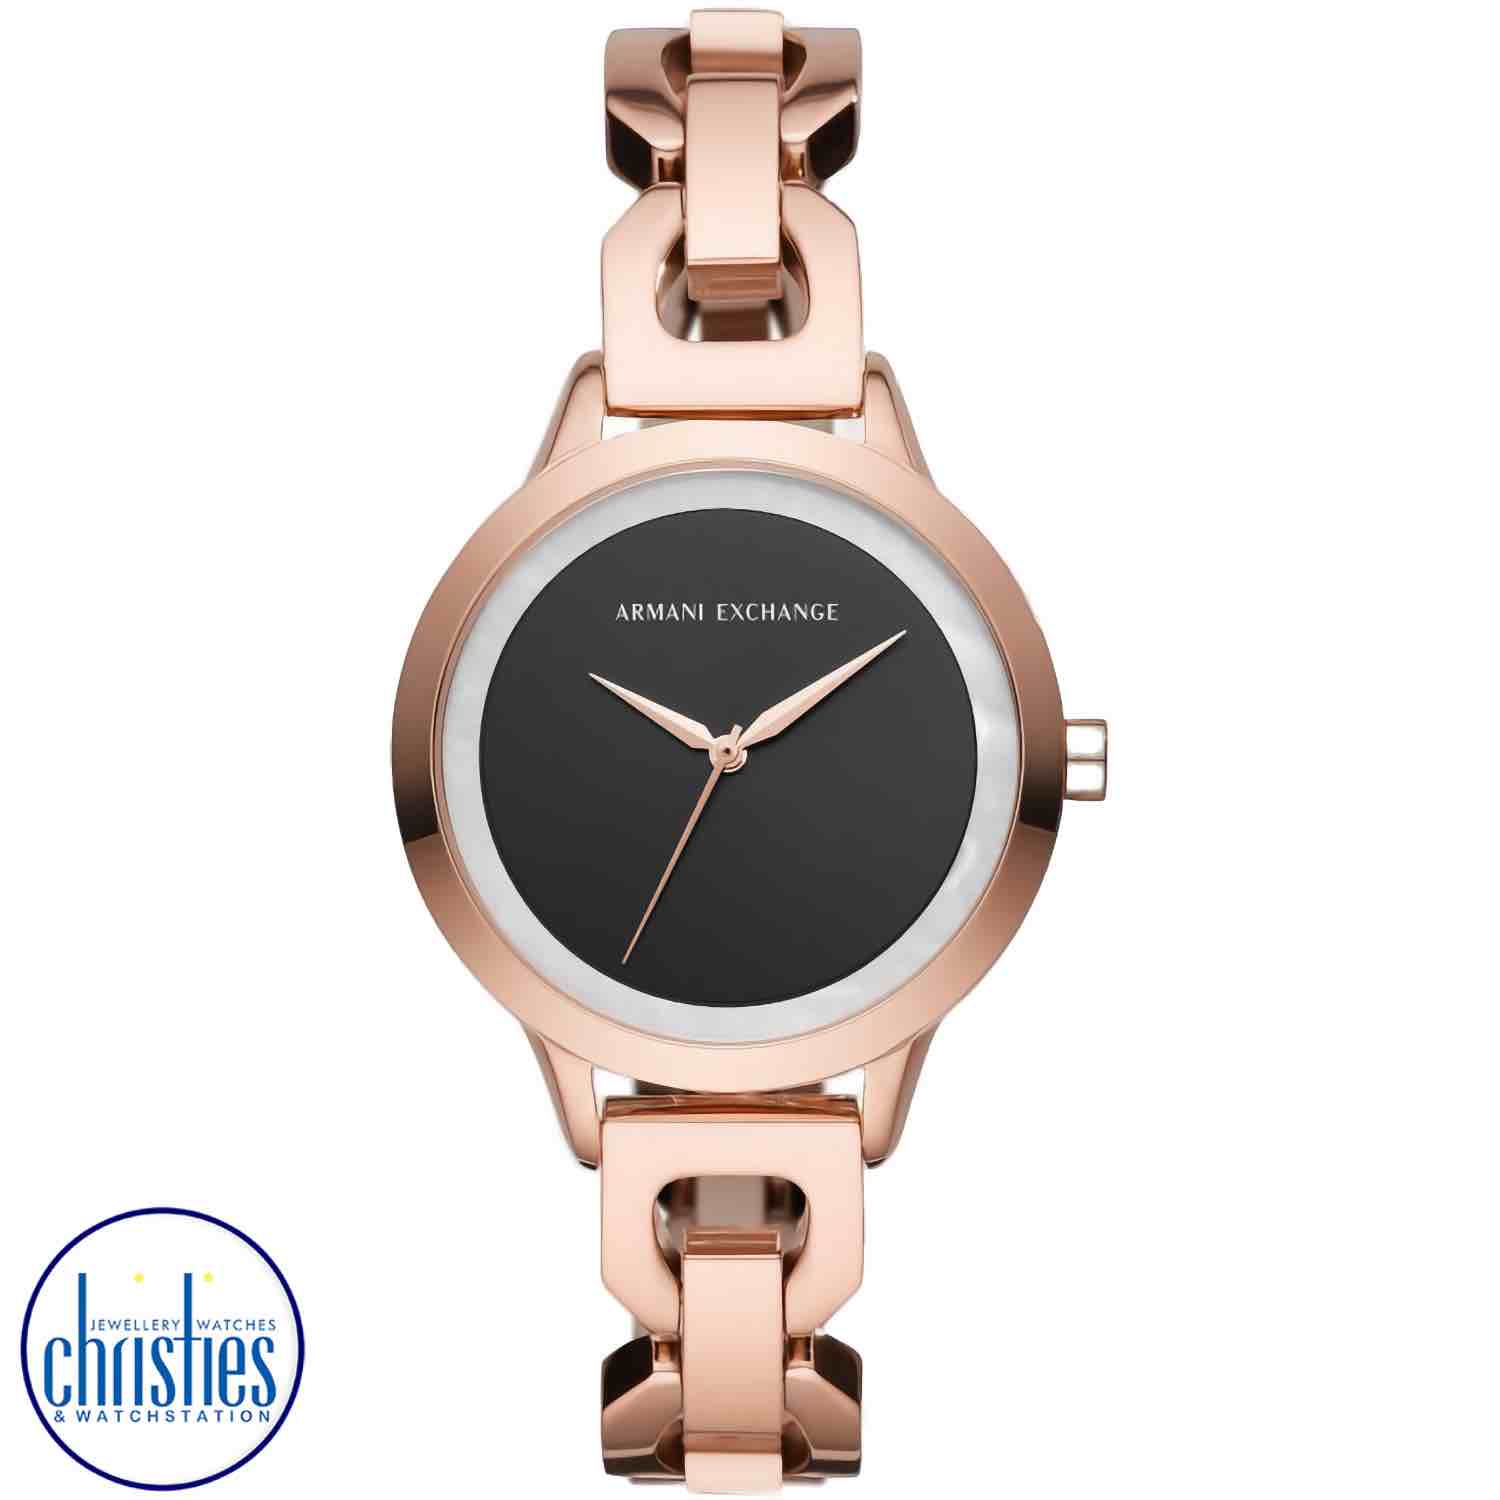 AX5613 A|X Armani Exchange Rose Gold-Tone  Harper Watch. AX5613 A|X Armani Exchange Rose Gold-Tone  Harper WatchAfterpay - Split your purchase into 4 instalments - Pay for your purchase over 4 instalments, due every two weeks.